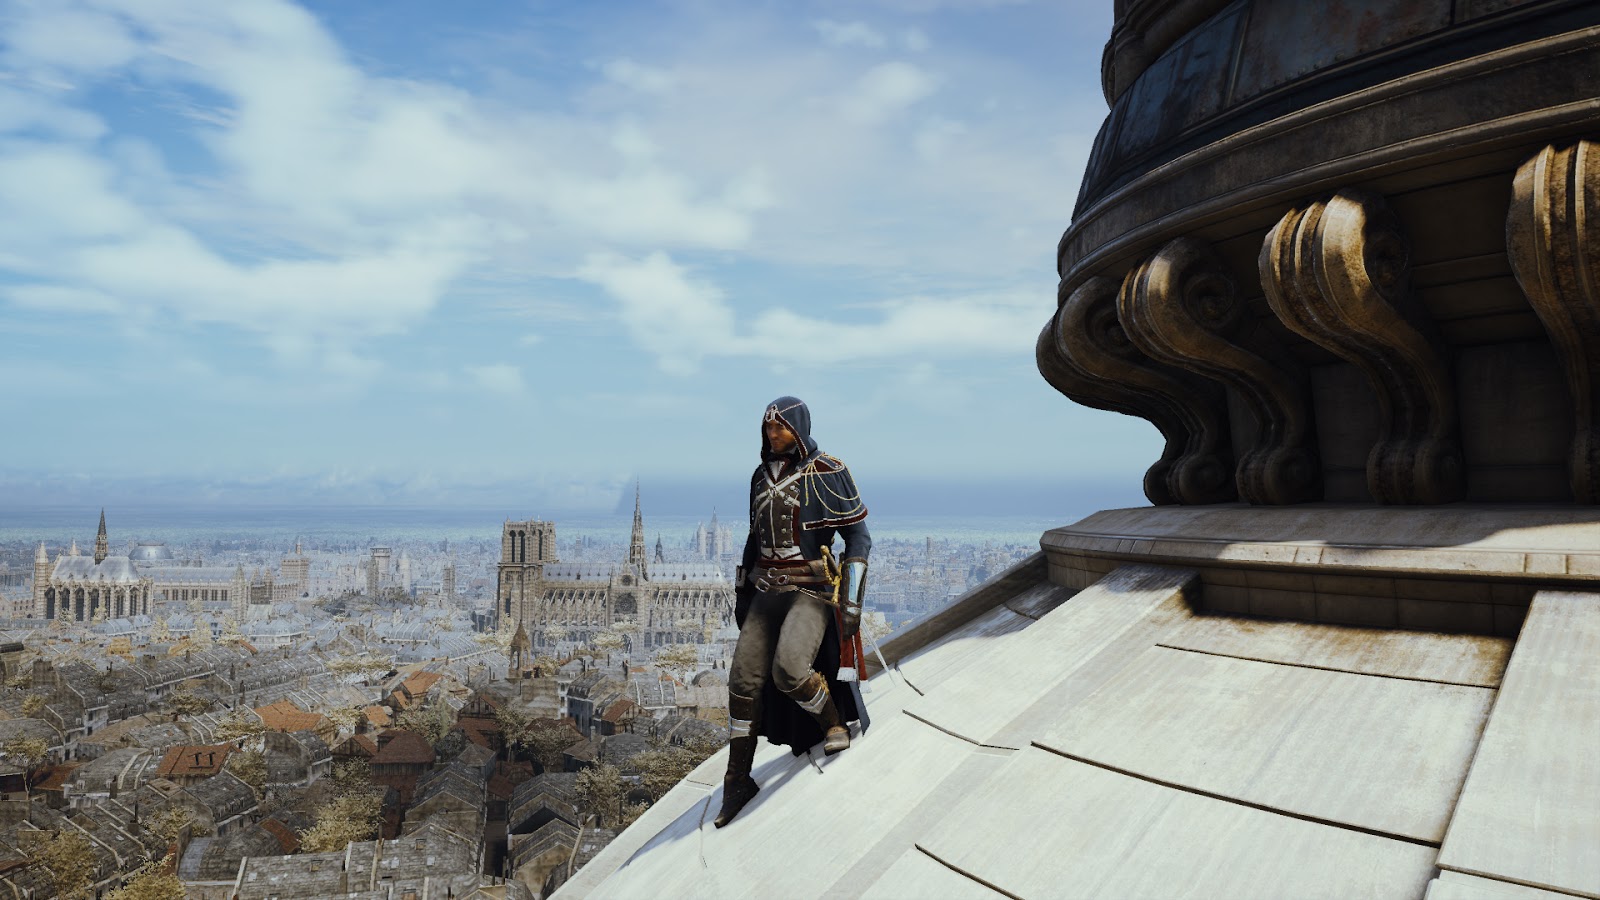 I Spent $100 In Assassin’s Creed Unity So You Wouldn’t Have To